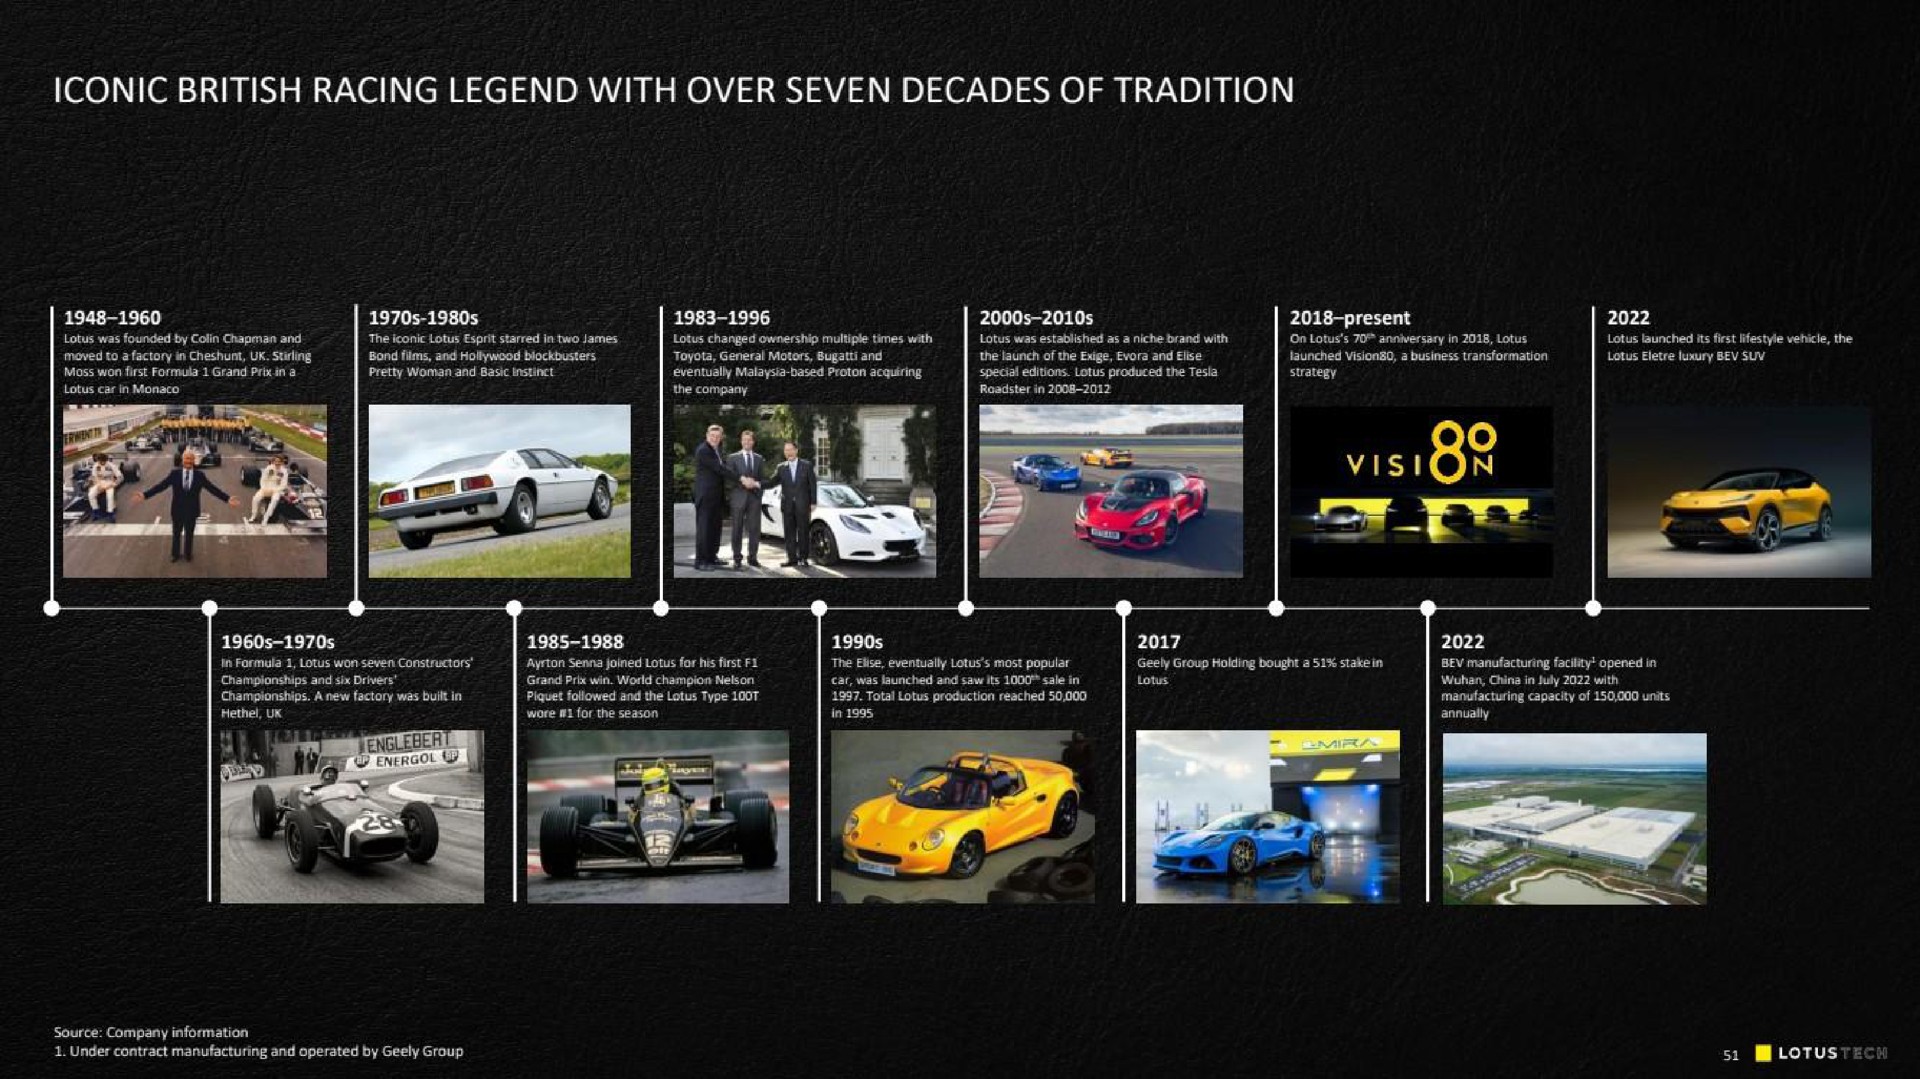 iconic racing legend with over seven decades of tradition me i | Lotus Cars